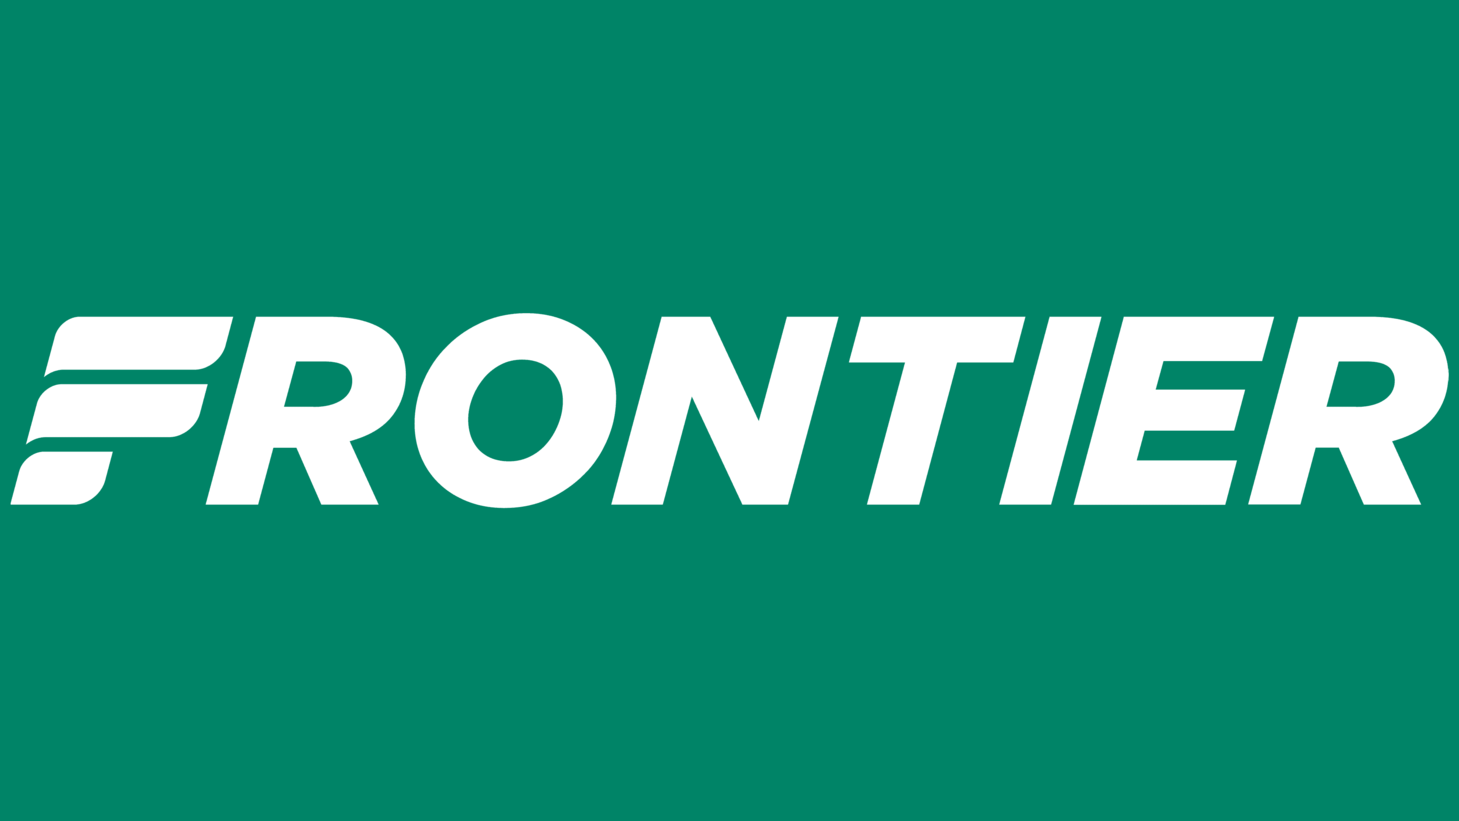 Frontier airlines logo